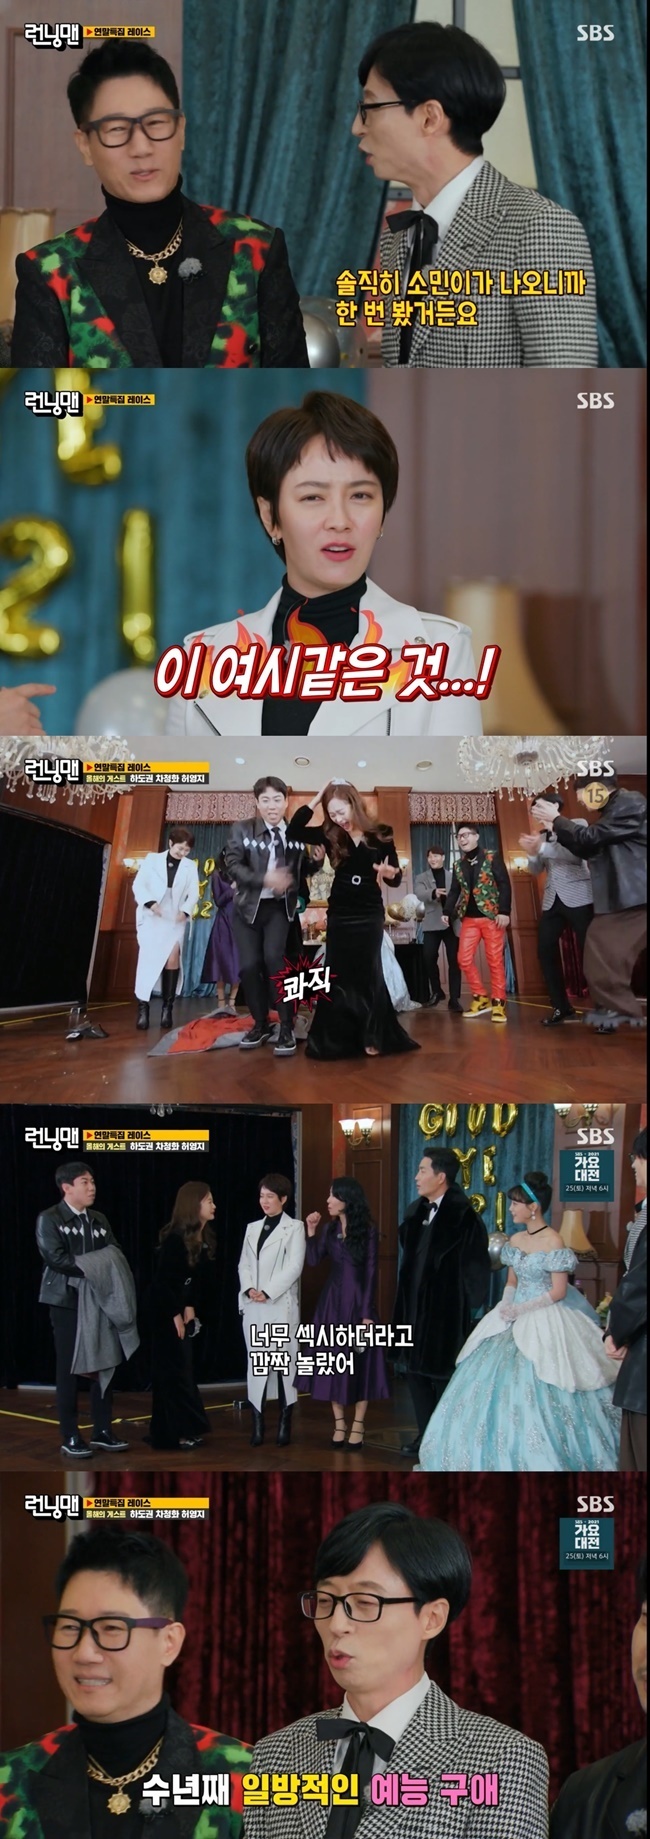 Actor Jeon So-min reported on Song Ji-hyos reaction to the drama Showwindow.On December 19, SBS Running Man was featured as a year-end special race, and Hadokwon, Cha Chung Hwa and Huh Youngji appeared as guests.Recently, Jeon So-min is appearing in the Channel A monthly drama Showwindow: The Queens House (playplayplayed by Han Bo-kyung, Park Hye-young/directed by Kang Sol, Park Dae-hee).I watched the drama because the sommin came out, and I did it, said Yoo Jae-Suk, and I admired it as different from the sommin we see here and the drama sommin.Jeon So-min said, Jihyo also saw her sister and texted, and Song Ji-hyo laughed, shouting, Its like this lady.Later, Jeon So-min and Yang Se-chan danced together ahead of Race; Jeon So-min told Yang Se-chans iron wall defense: Its too iron walled.Who wants to date? laughed Yoo Jae-Suk, who saw it, stressing, You never saw Somin drama once, look at it.Cha Chung-hwa also praised I was surprised that I was so sexy, and Jeon So-min said, I am really fatal.